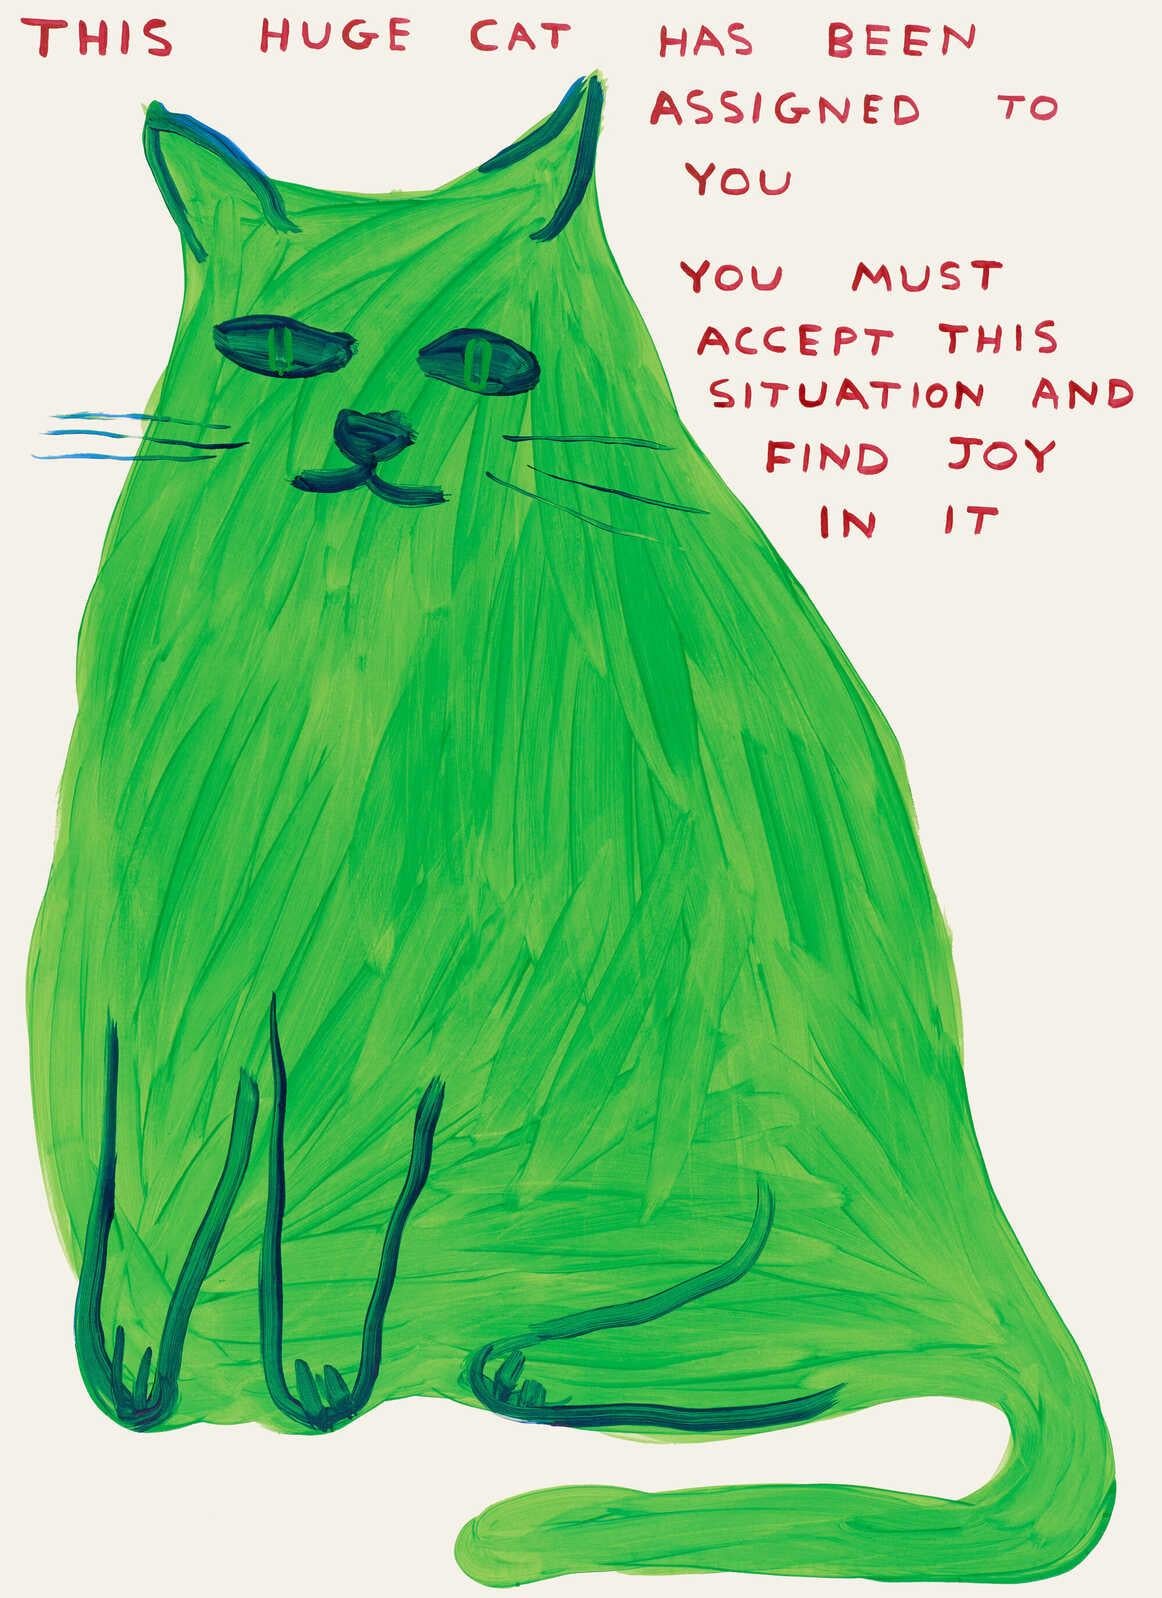 What materials does David Shrigley use?